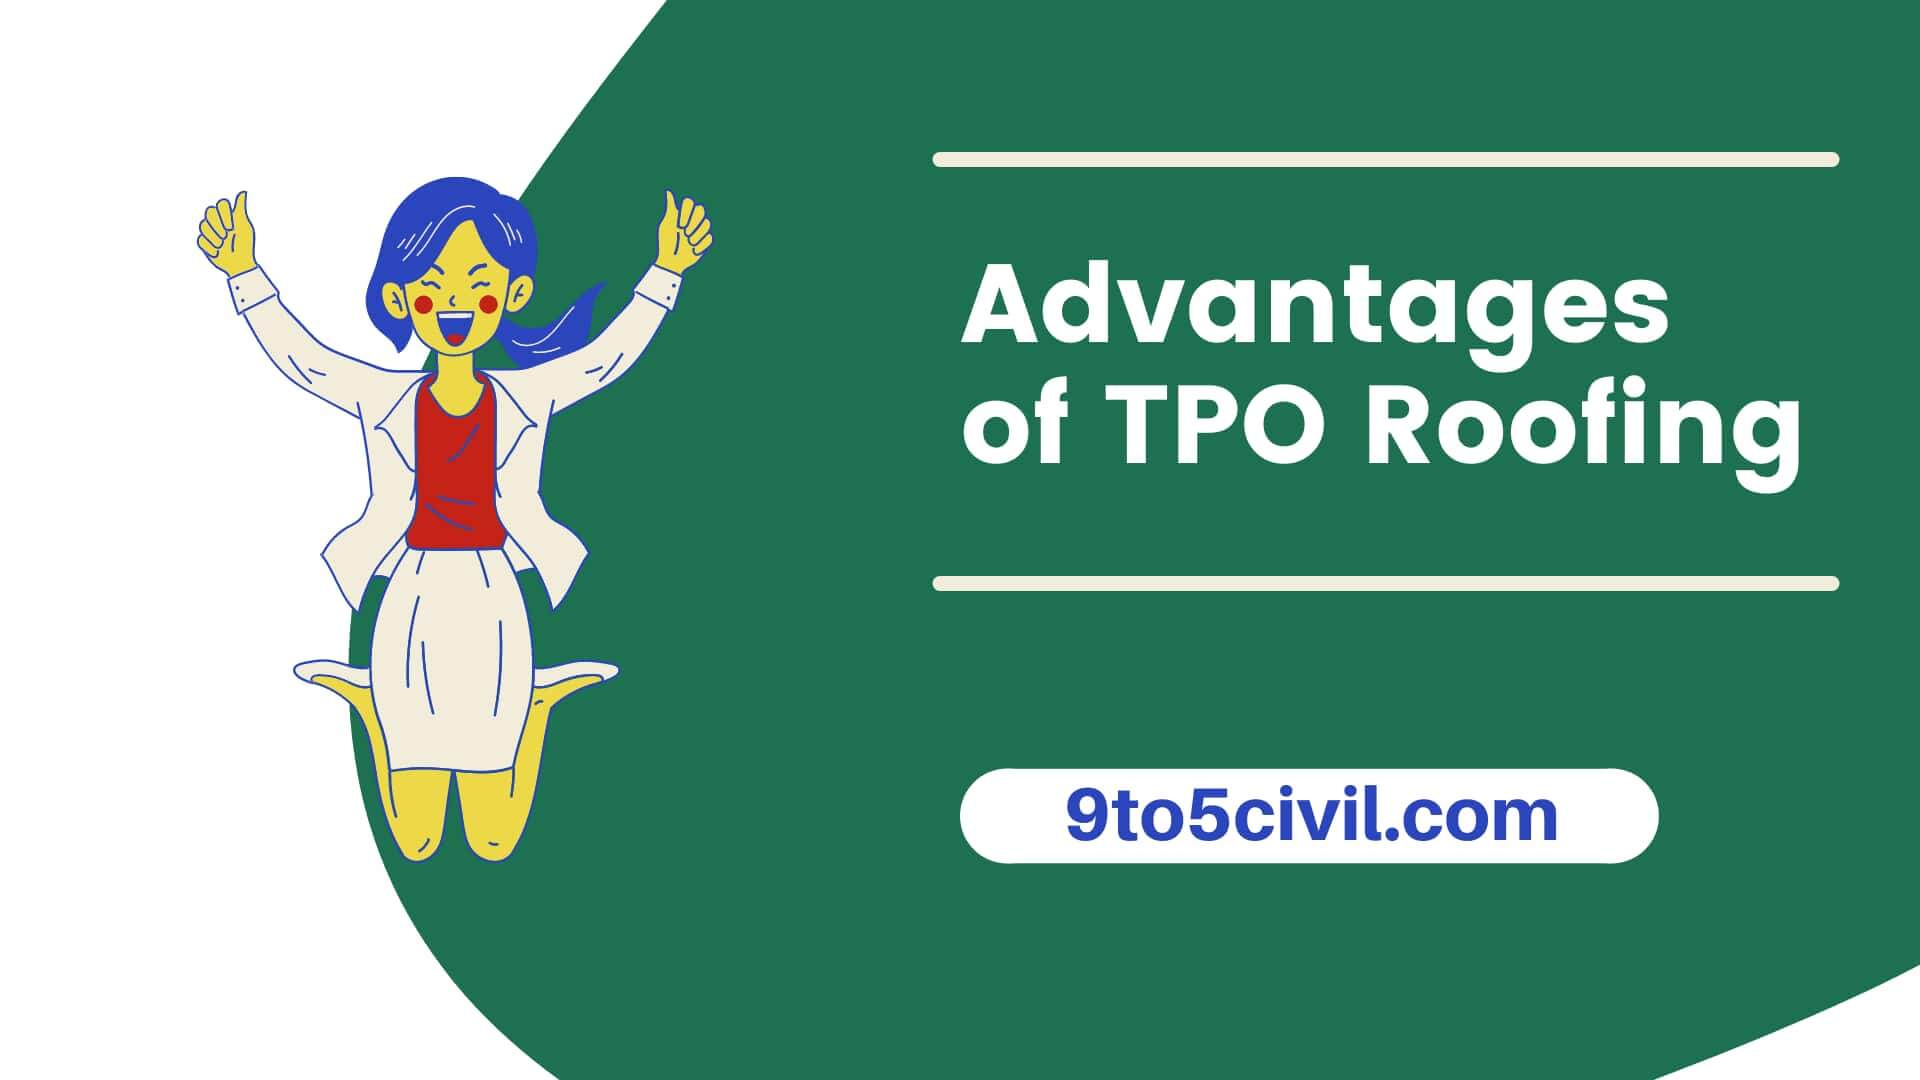 Advantages of TPO Roofing